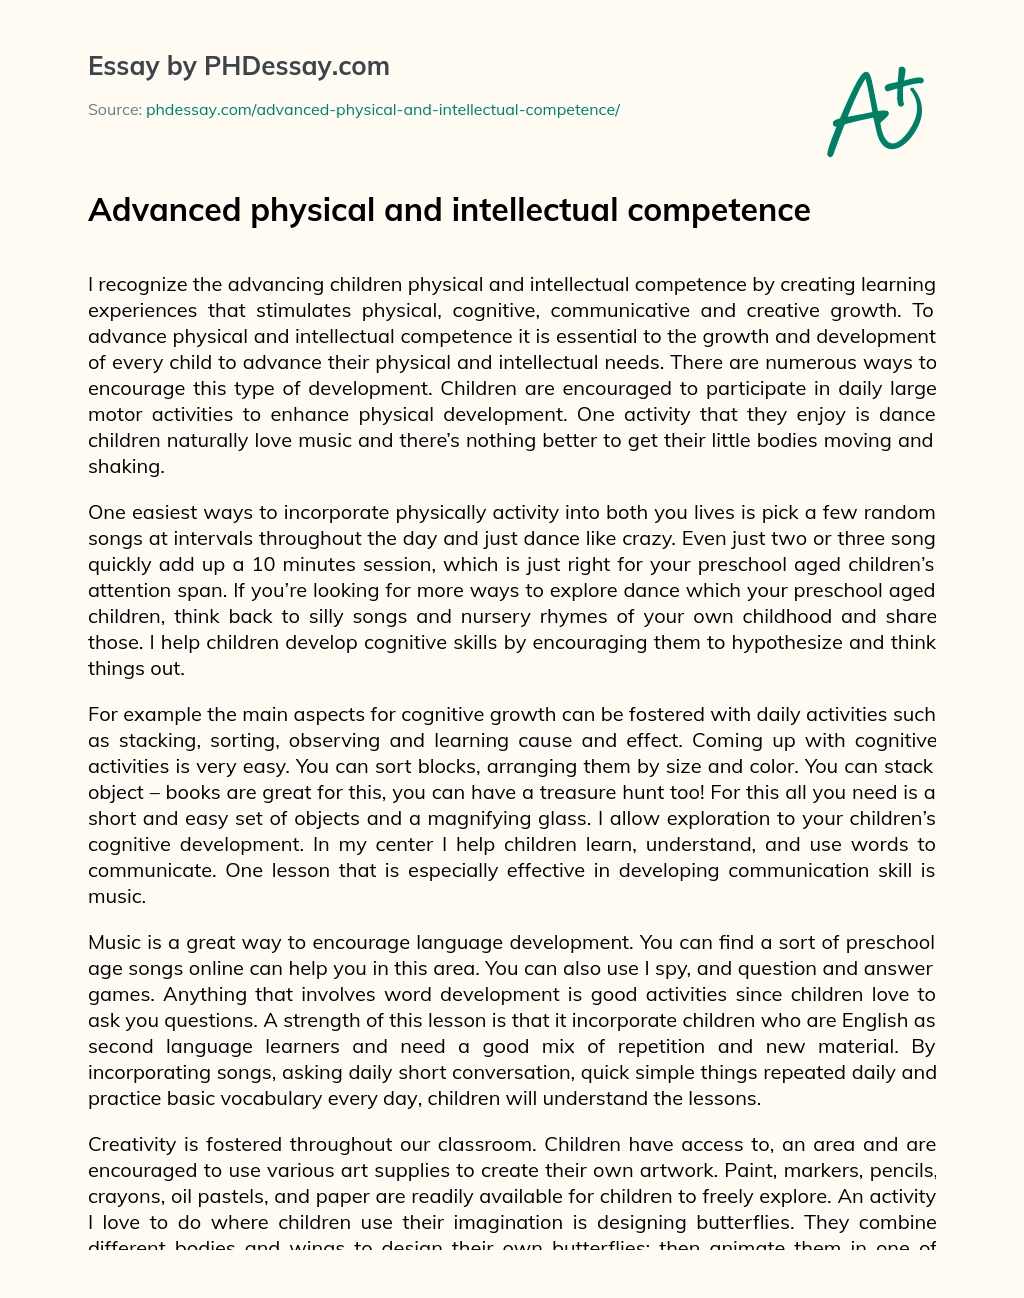 Advanced physical and intellectual competence essay